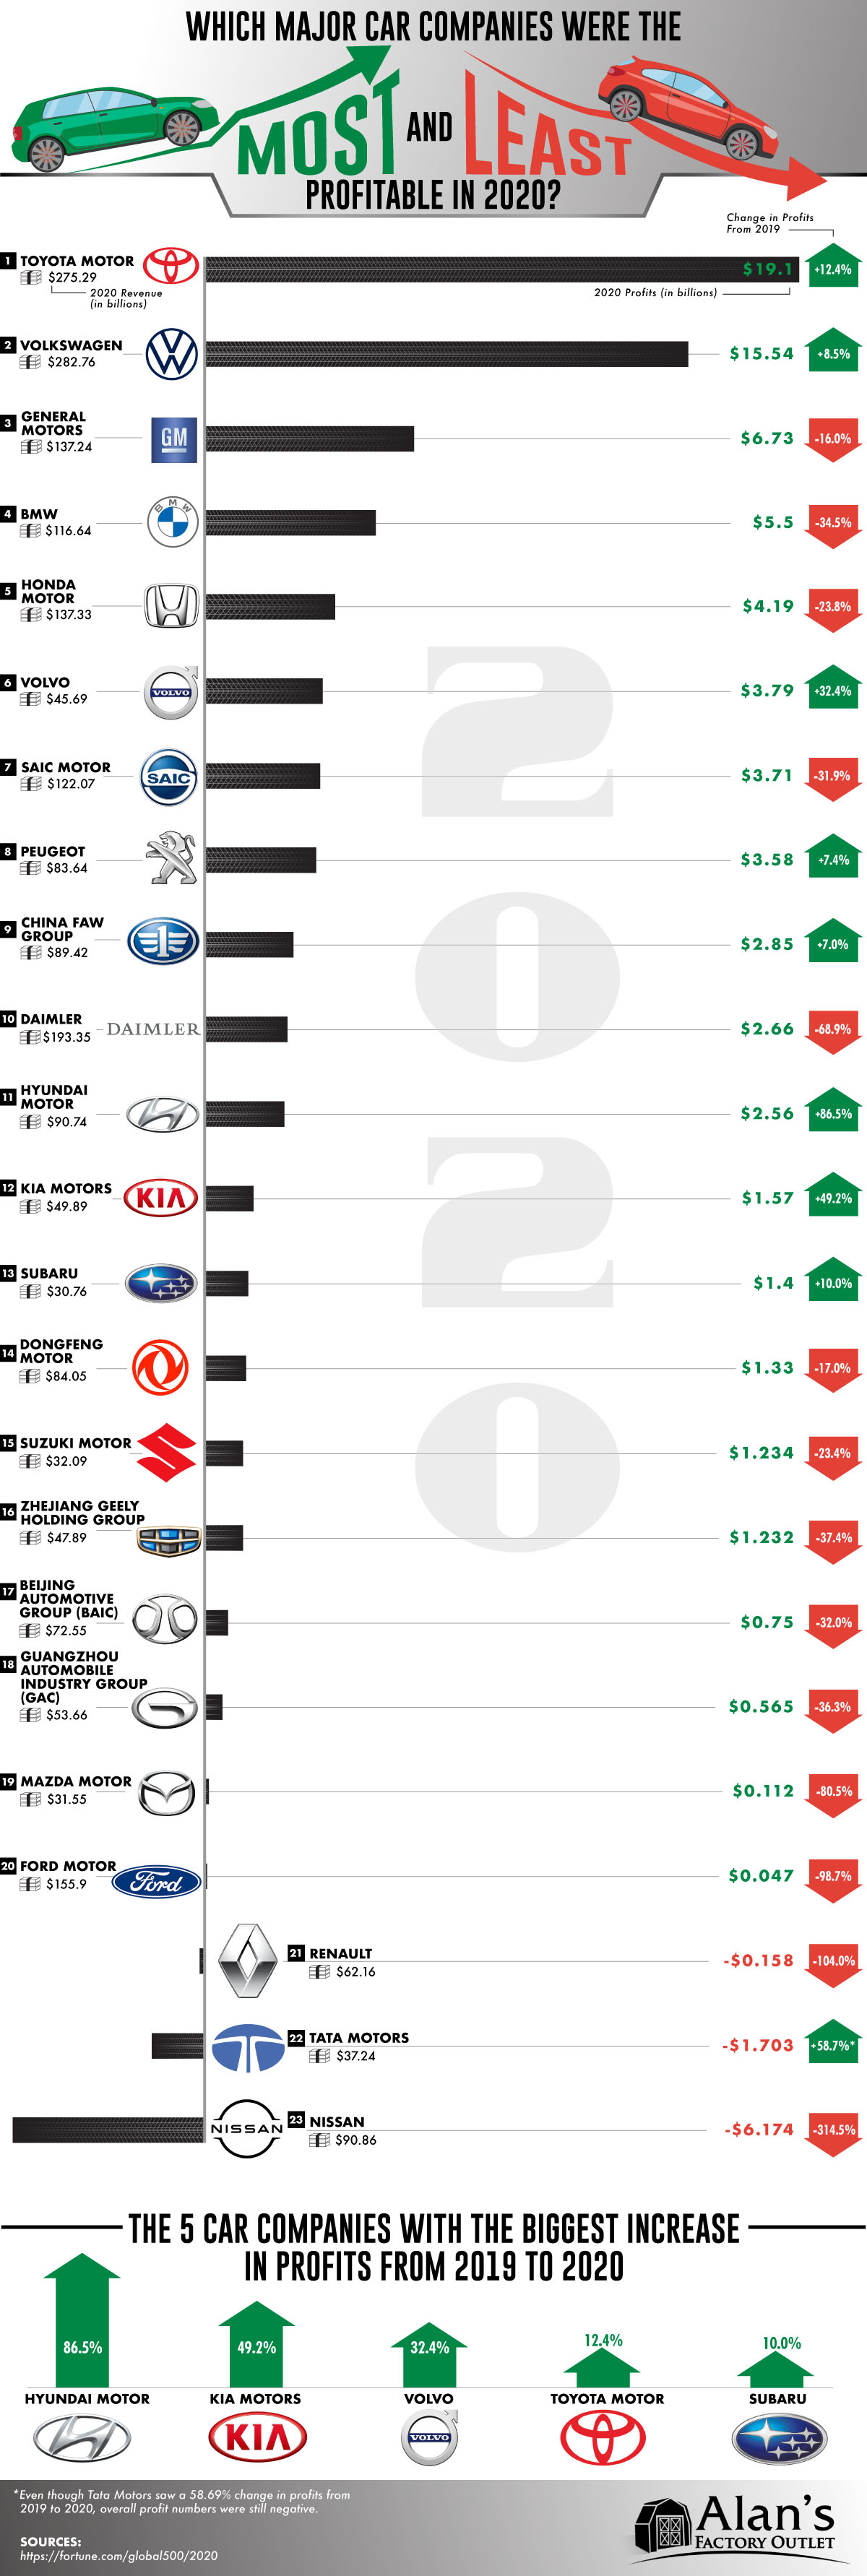 Which Major Car Companies Were the Most & Least Profitable in 2020